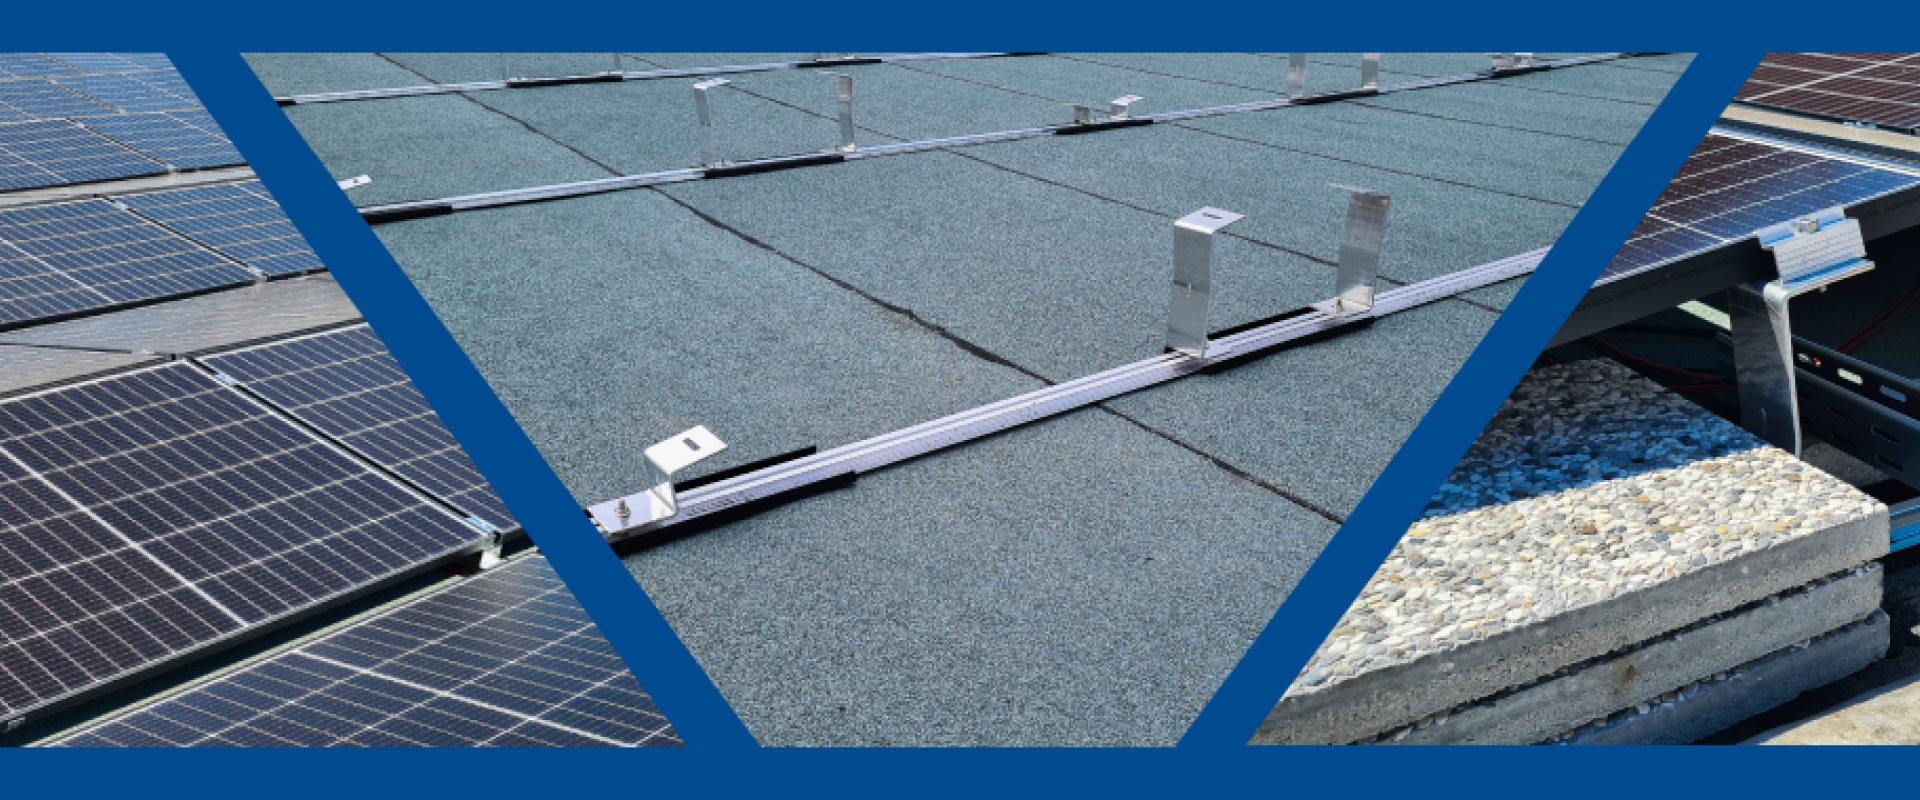 Introducing Hermi Multi Flat – A universal solar mounting solution for flat roofs!